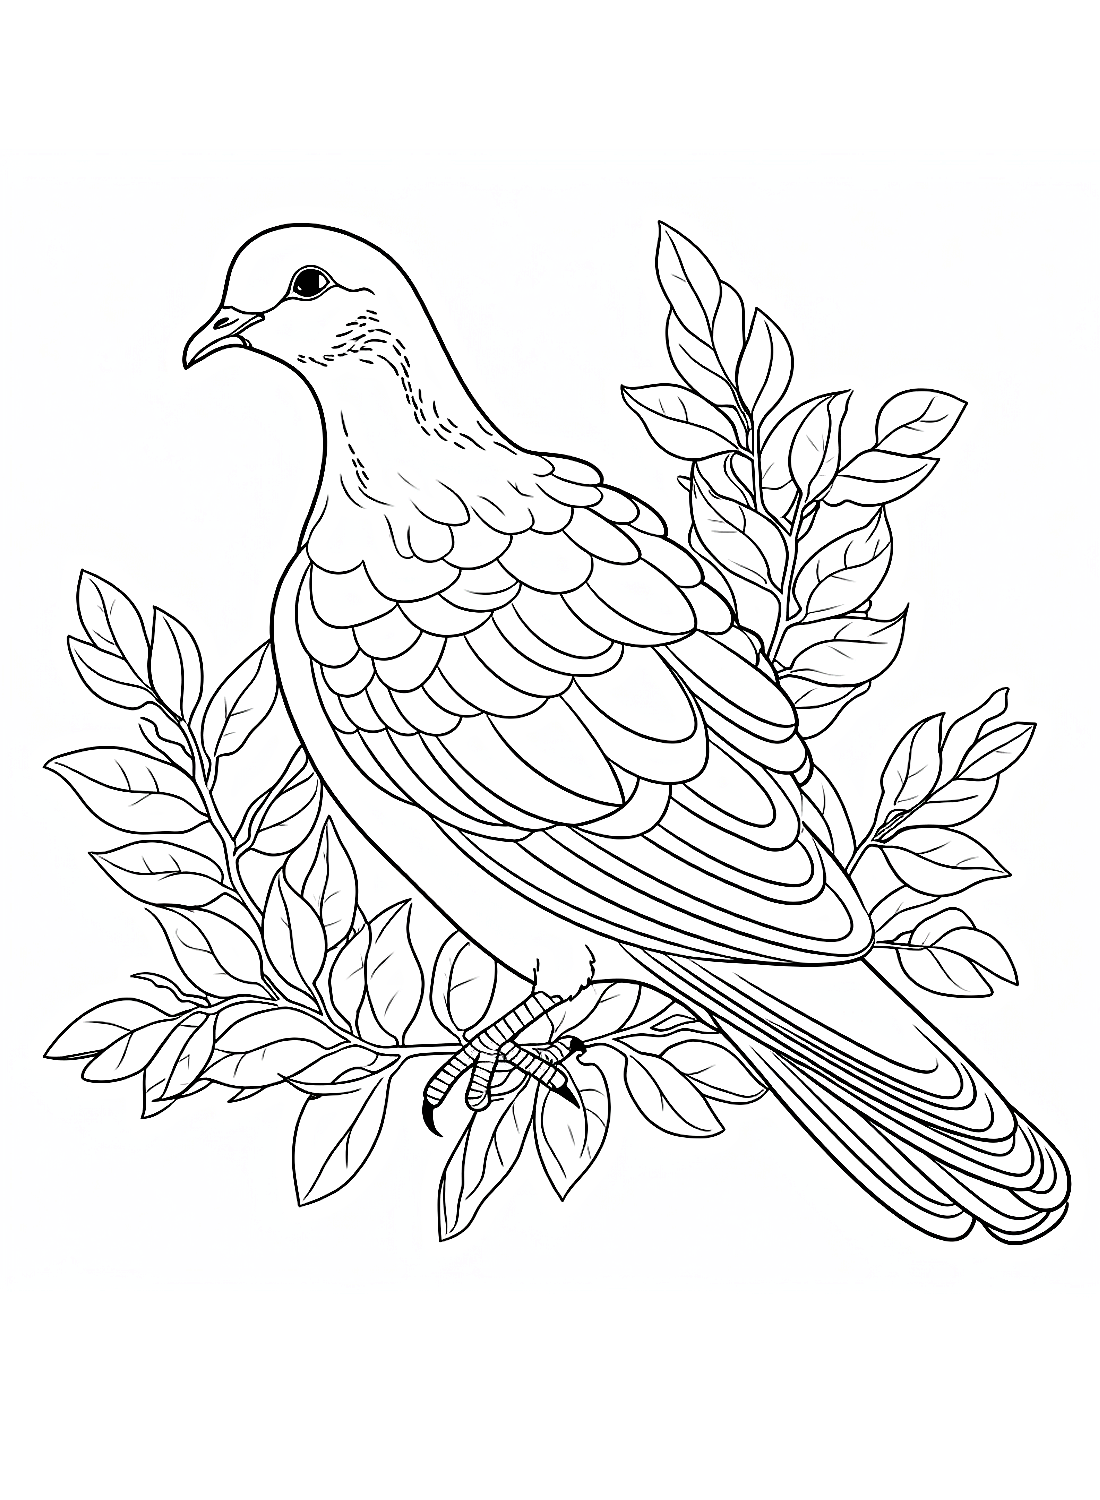 The dove Coloring Pages